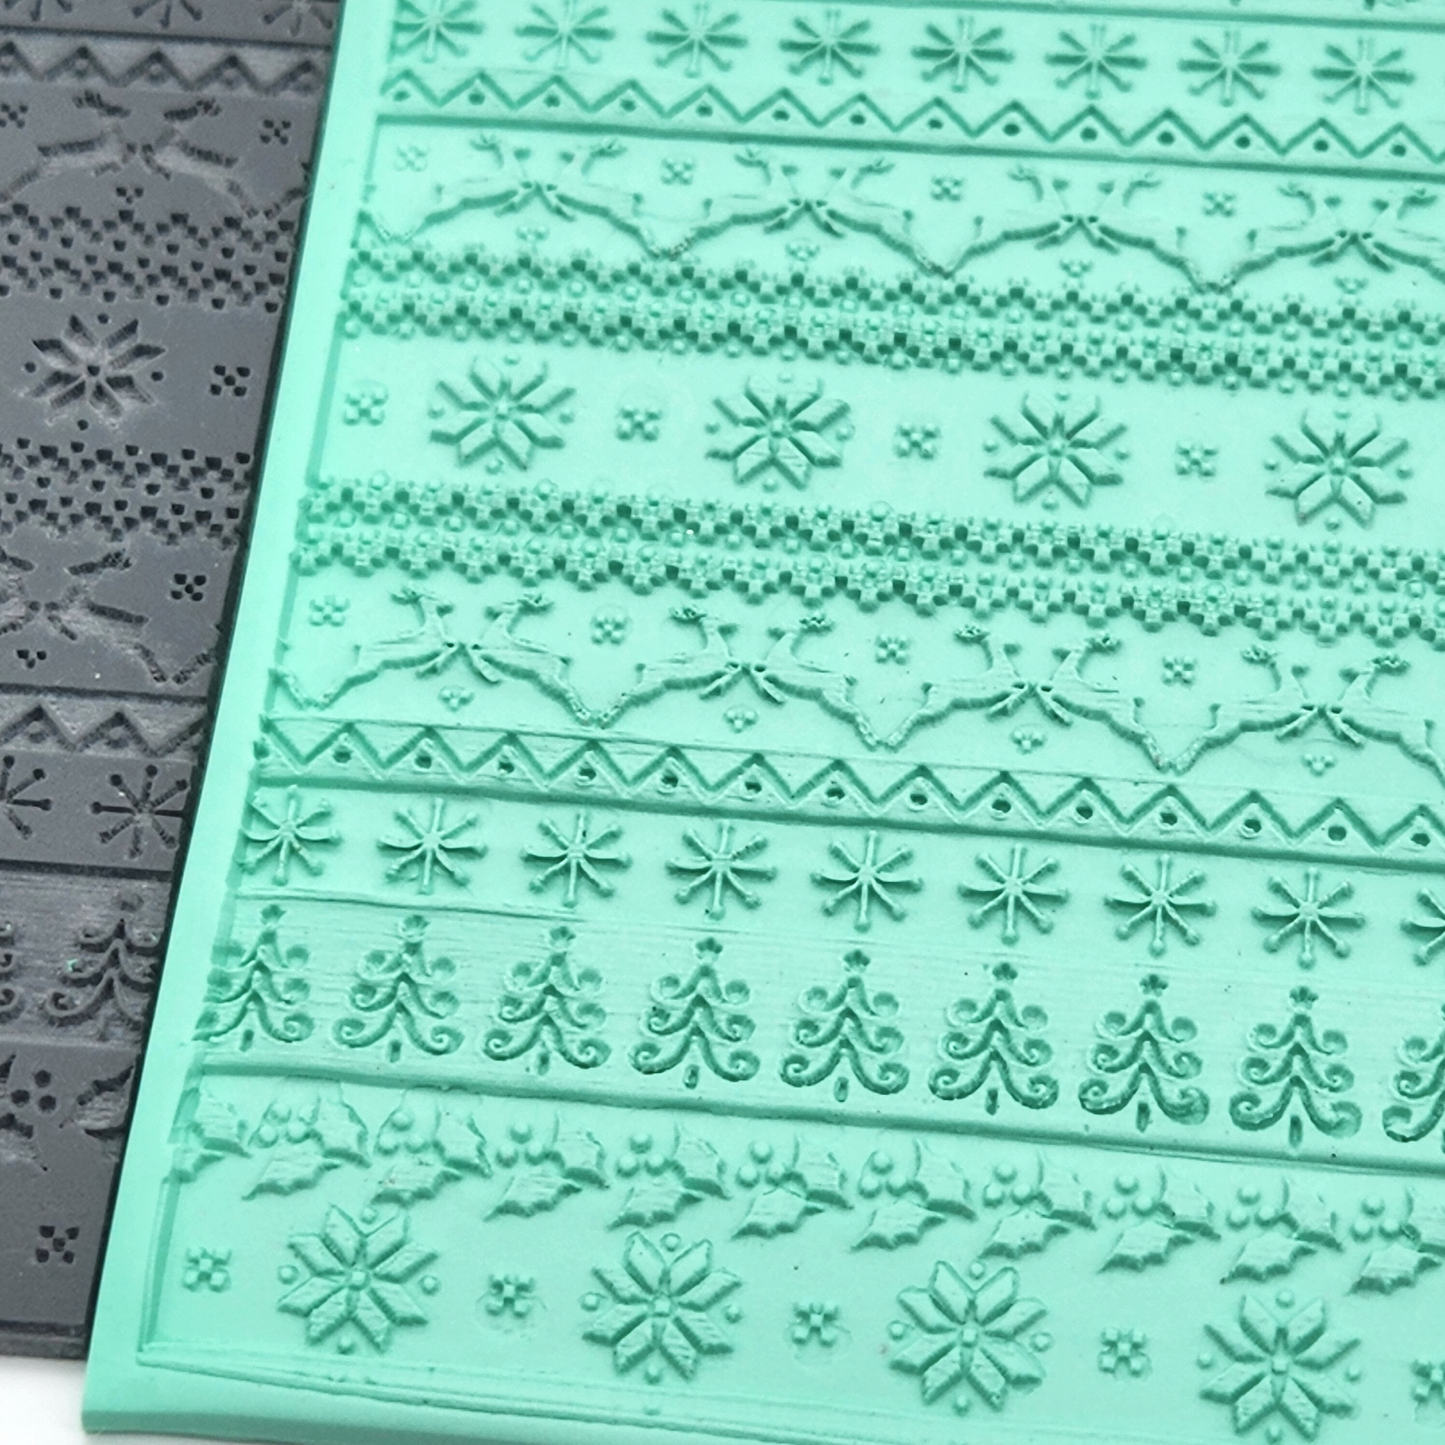 Christmas Knits Texture Rubber Mat Details for Polymer Clay Winter Crafts